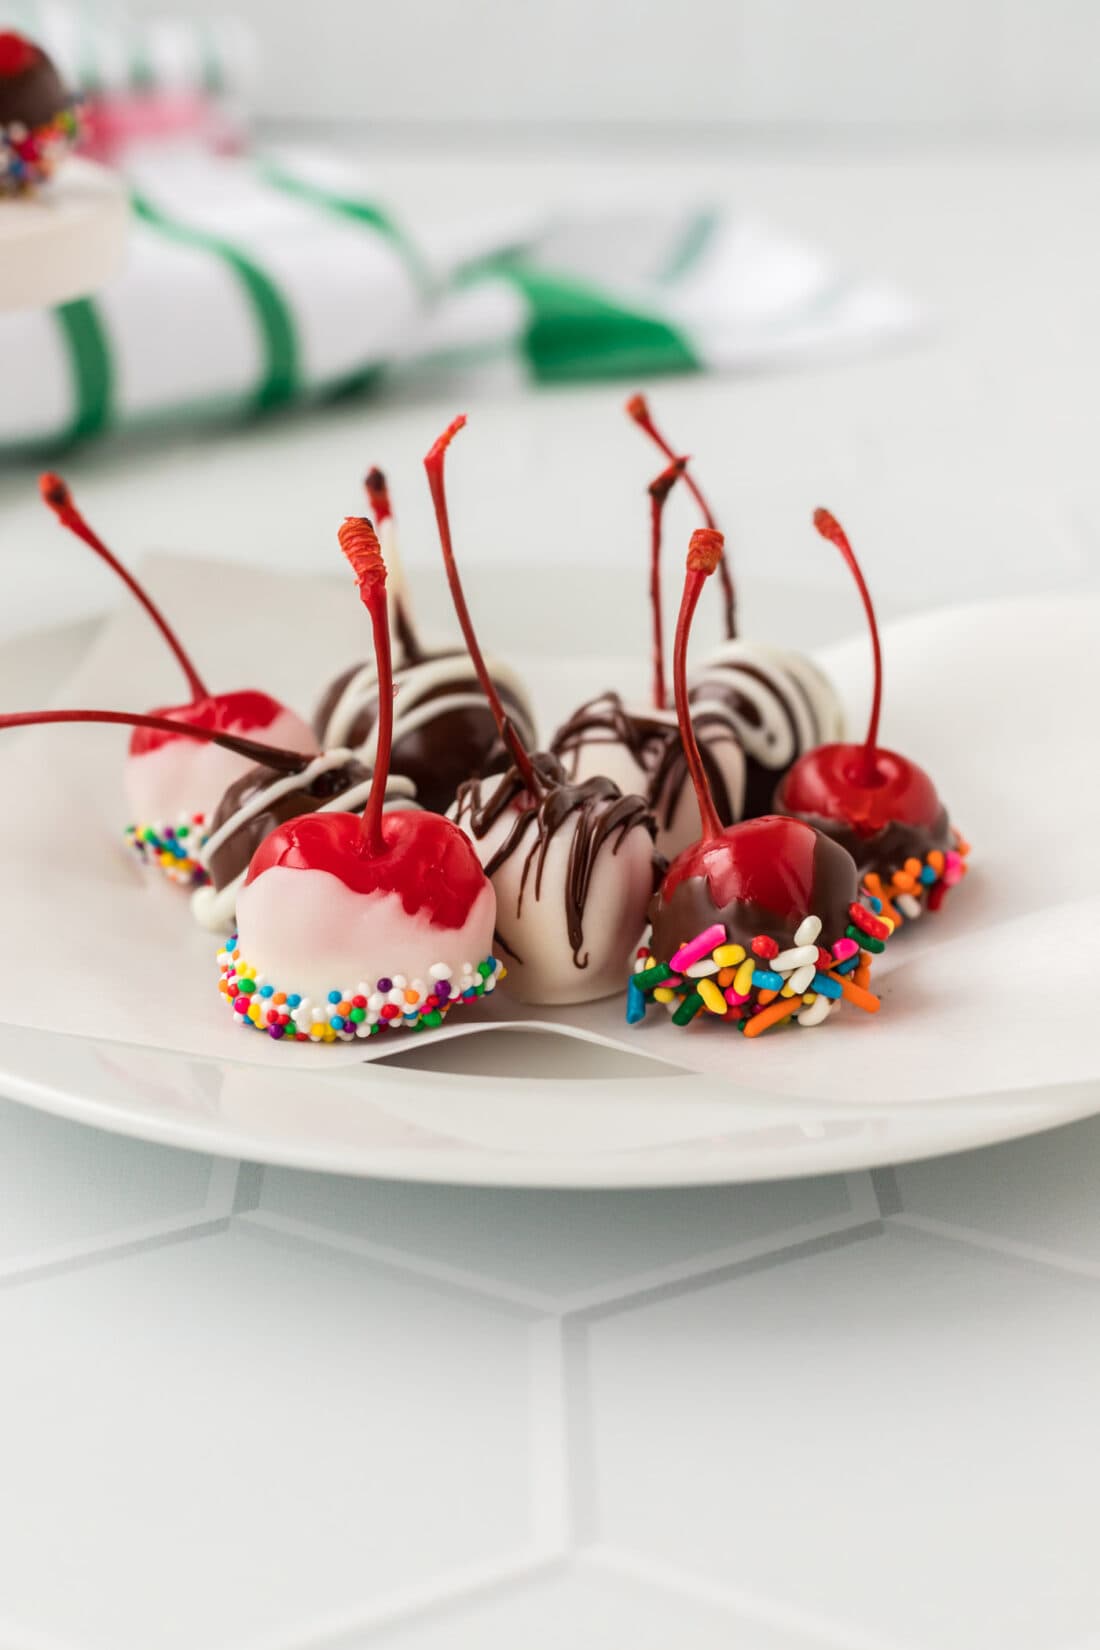 chocolate dipped Spiked Cherries on a plate